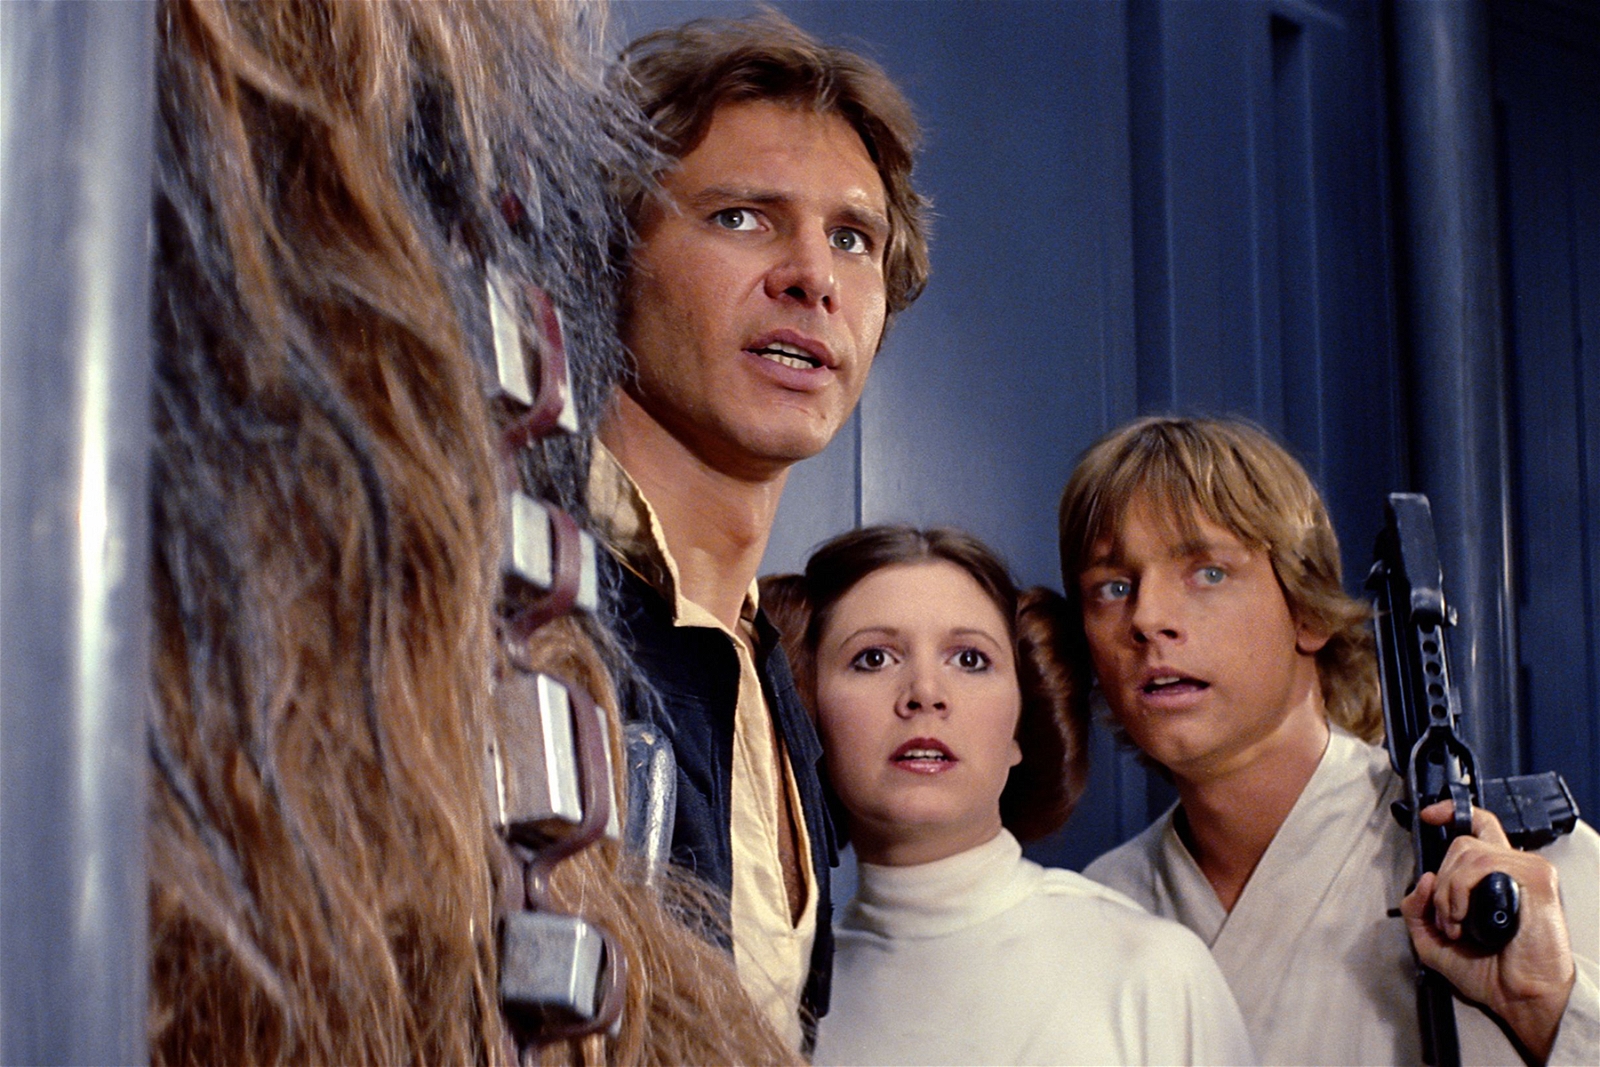 A still from Star Wars Episode IV: A New Hope 